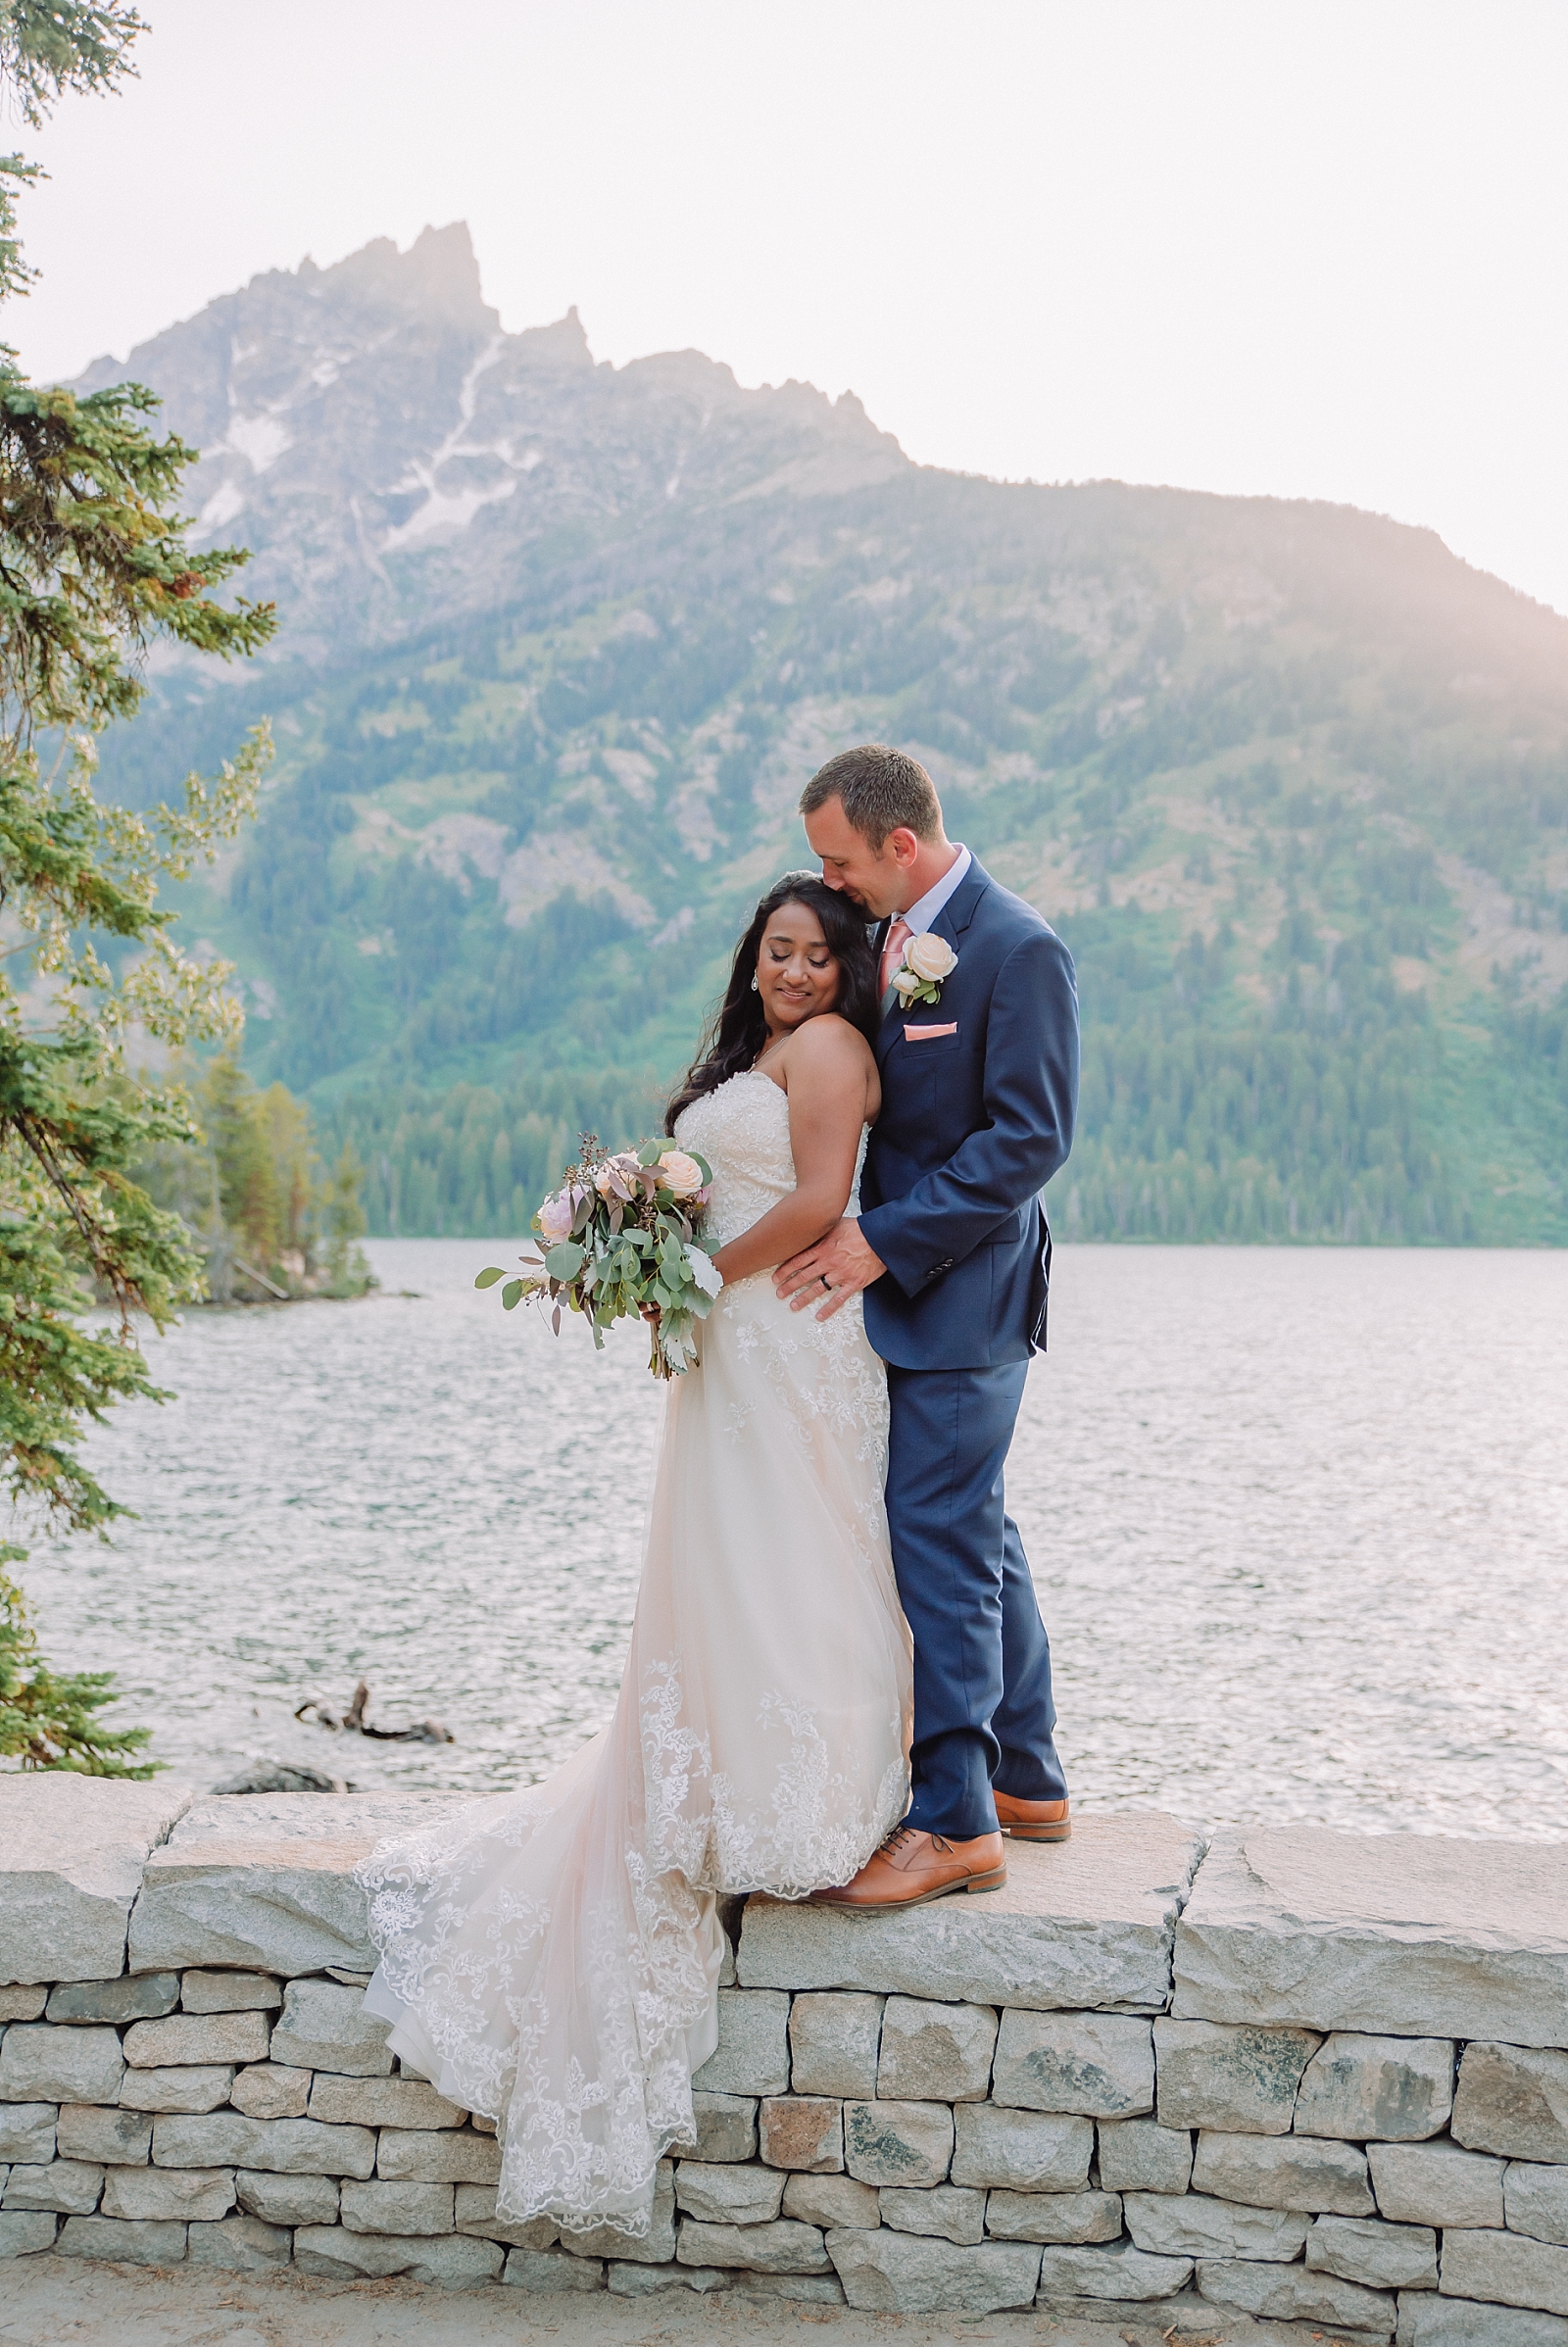 Jenny Lake wedding with Teewinot Mountain after couple chose local vendors for jackson hole elopement